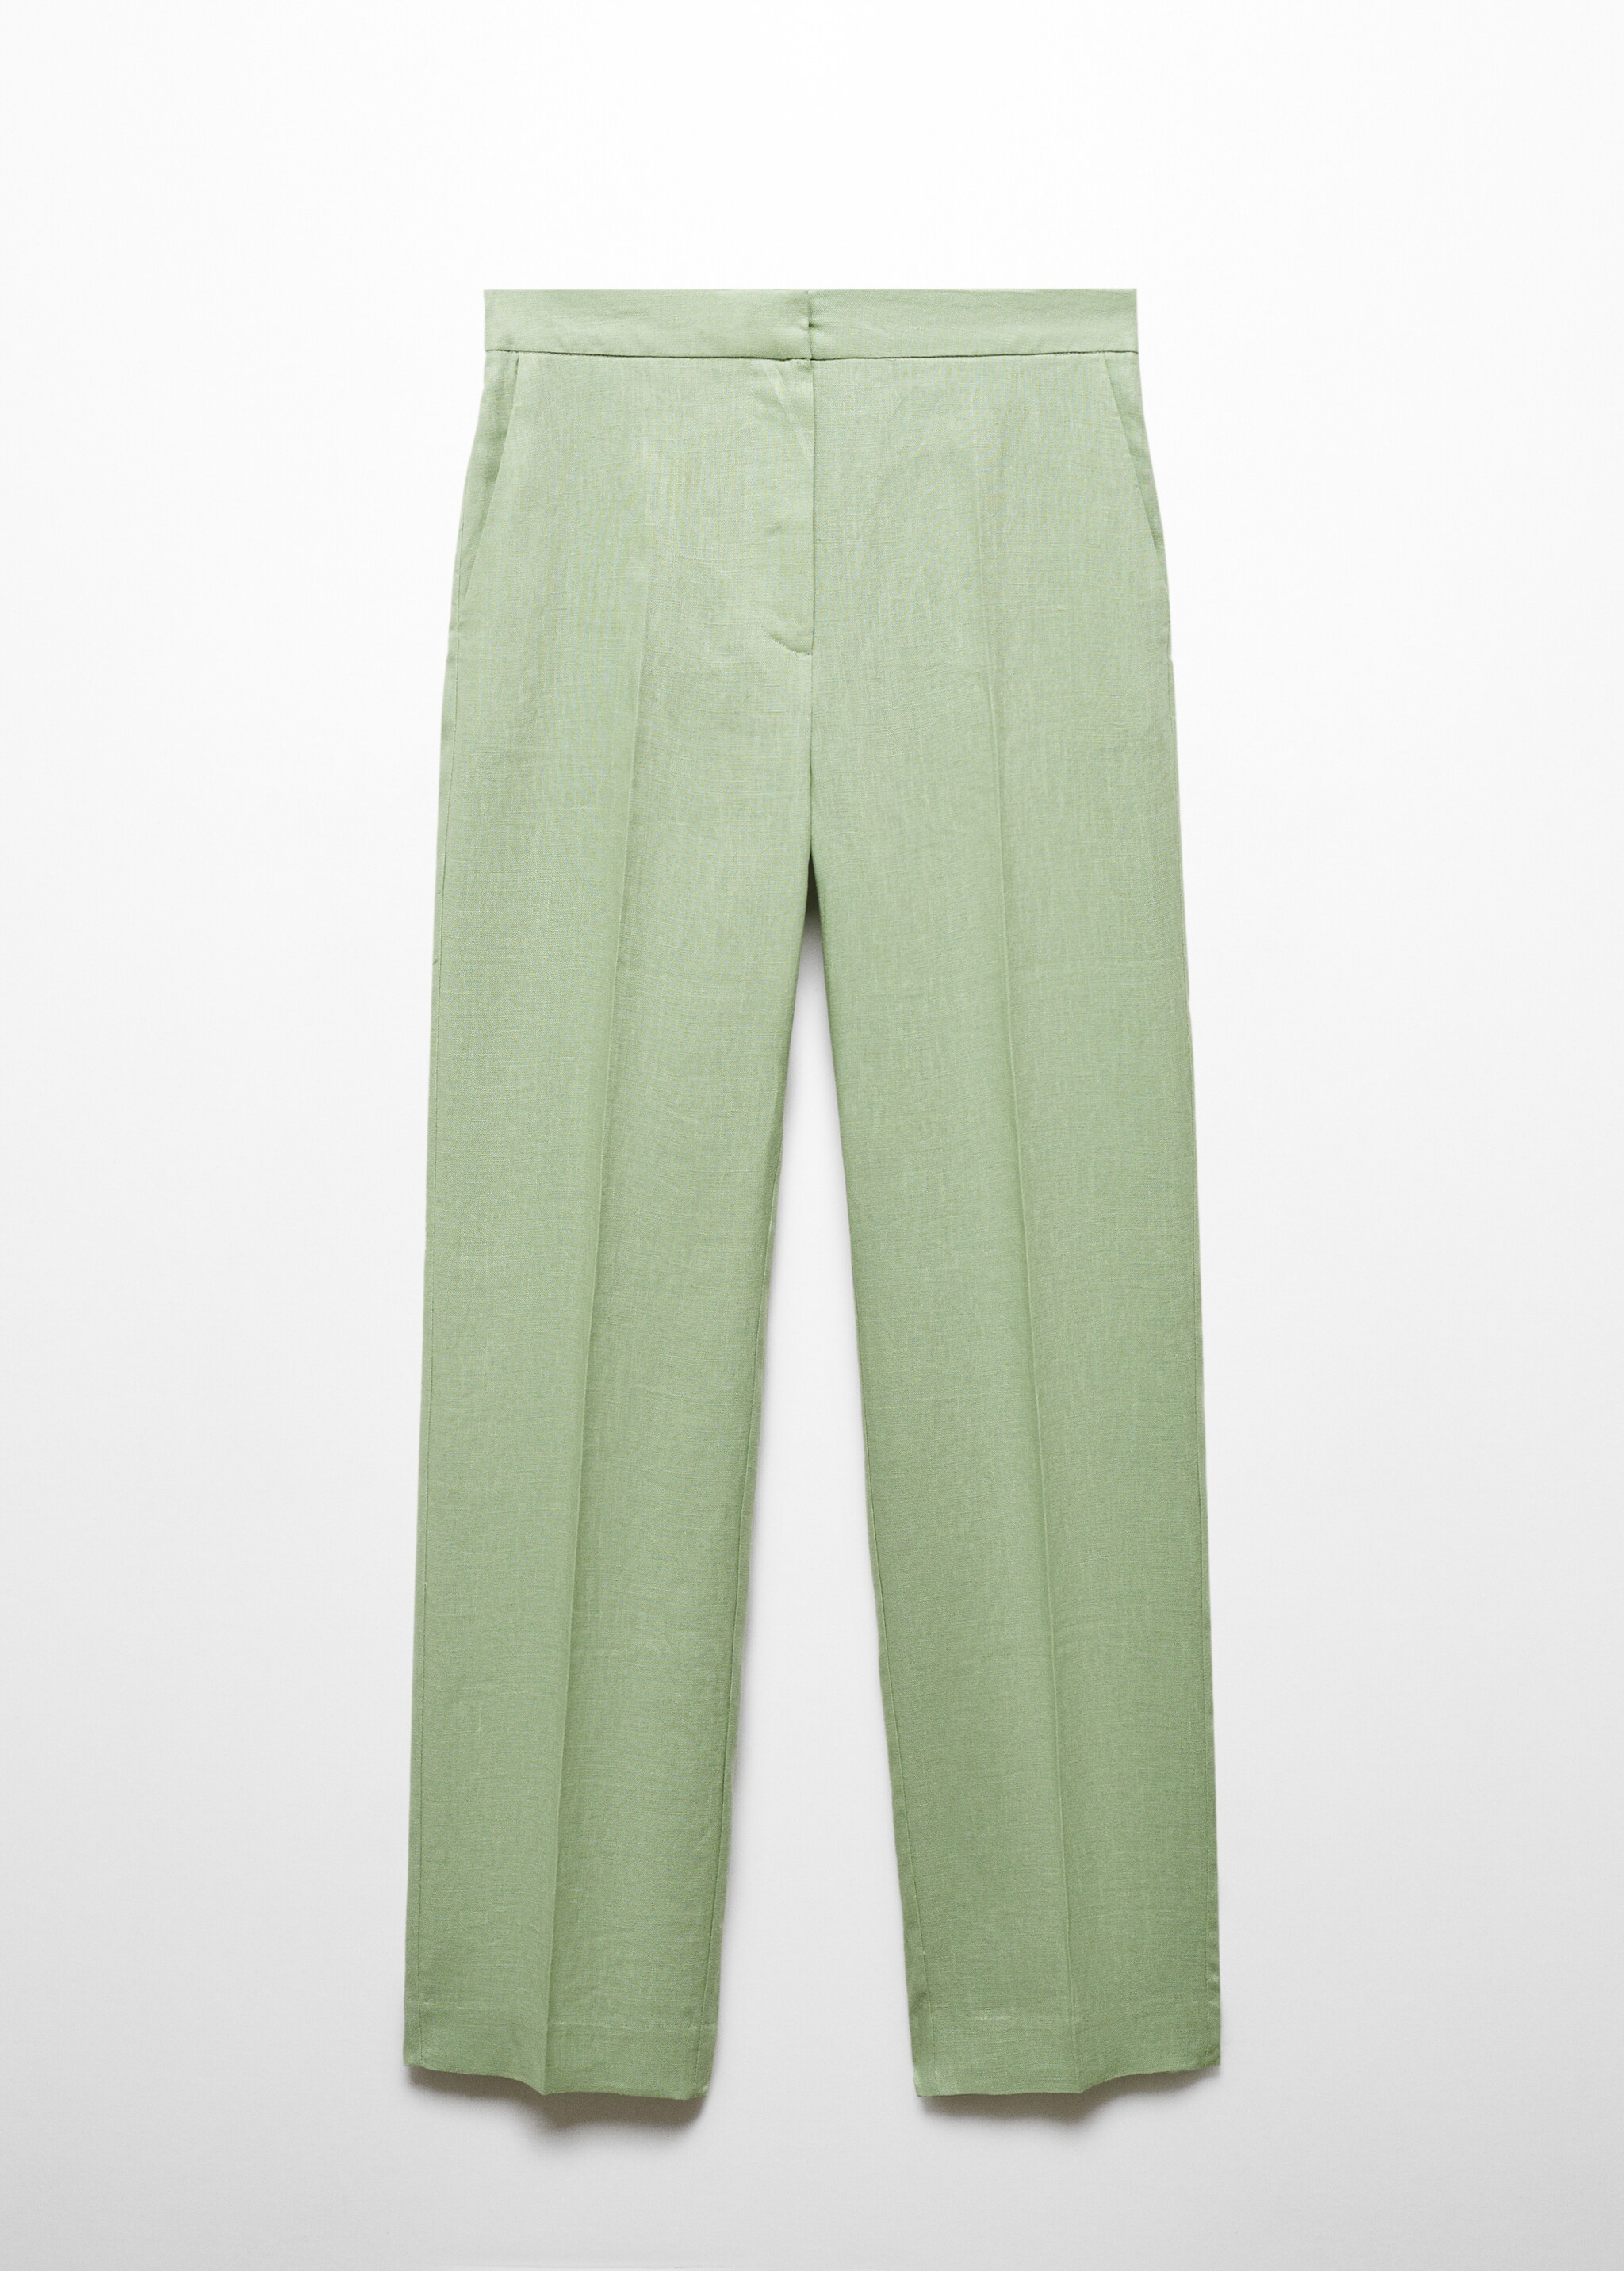 100% linen straight pants - Article without model